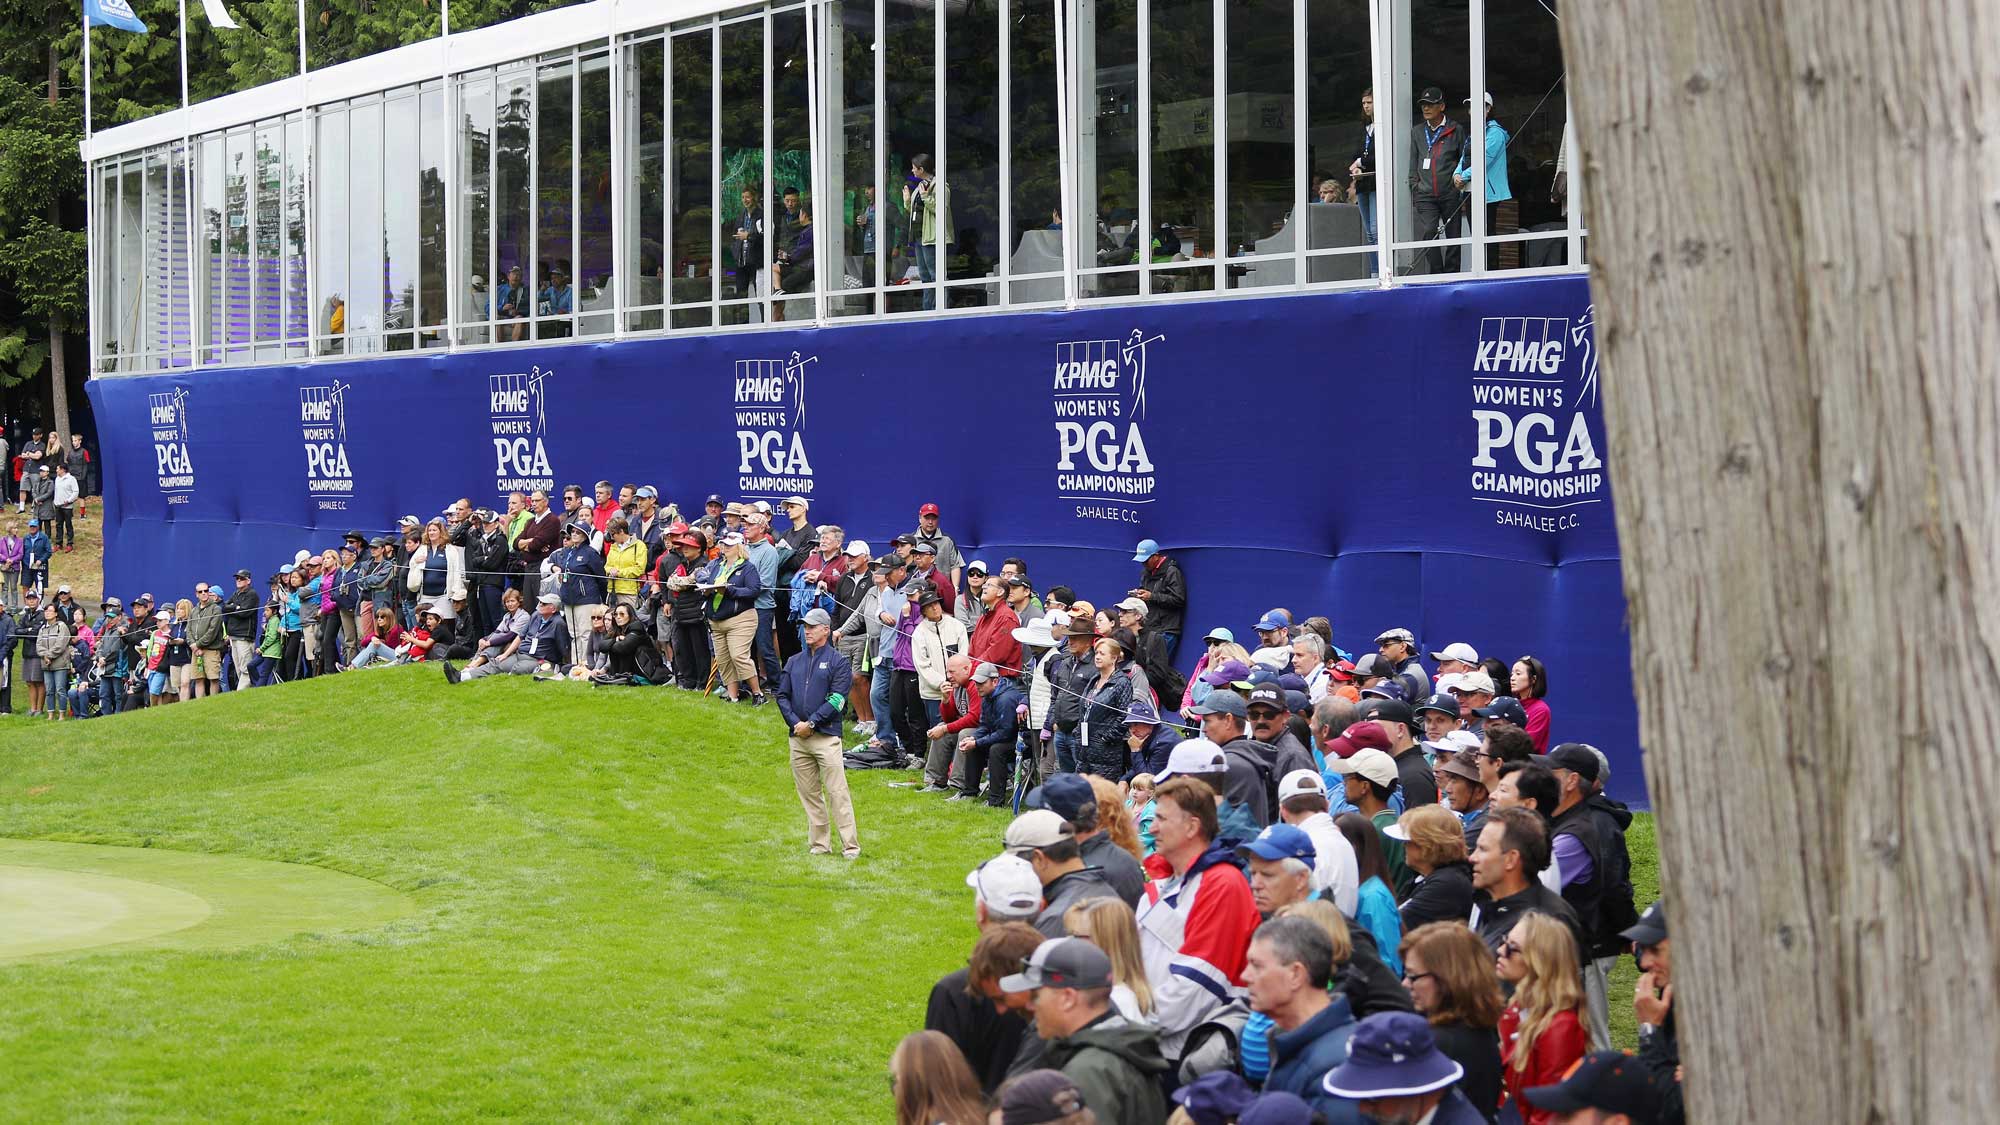 Fans watch the play on the 18th hole during the third round of the KPMG Women's PGA Championship